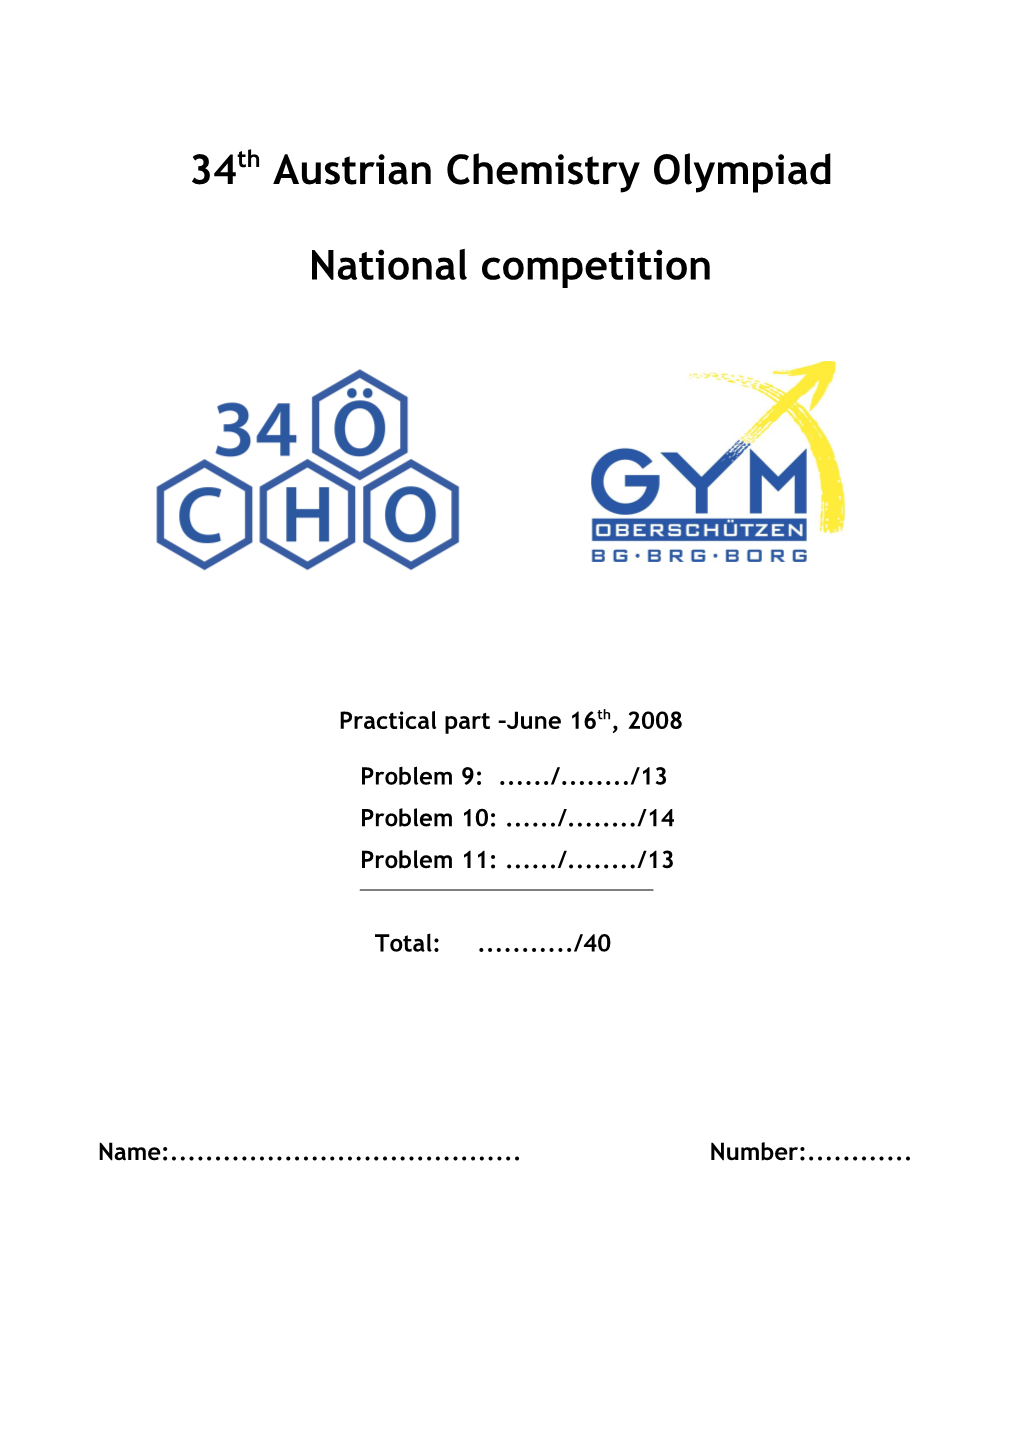 National Competition